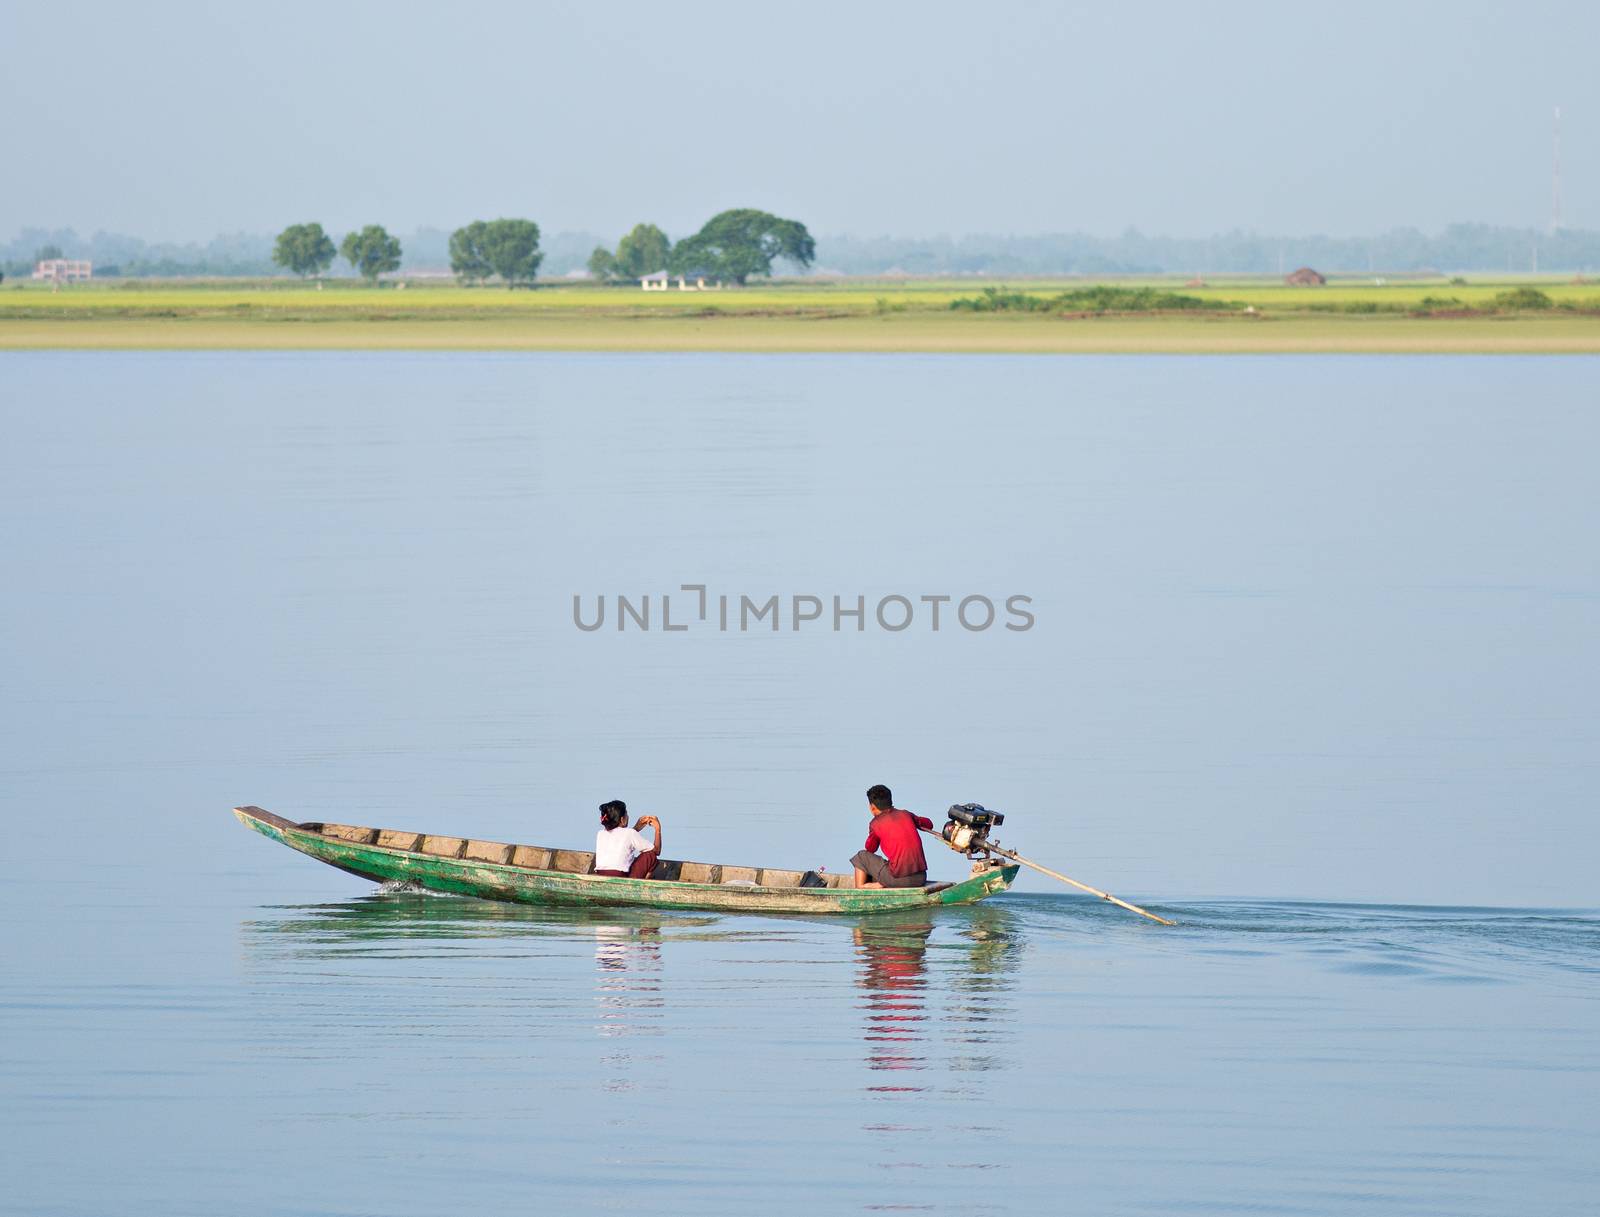 Sittwe, Rakhine State, Myanmar - October 16, 2014: Couple in a traditional, wooden longtail boat travelling down the Kaladan River at the Rakhine State in Myanmar.